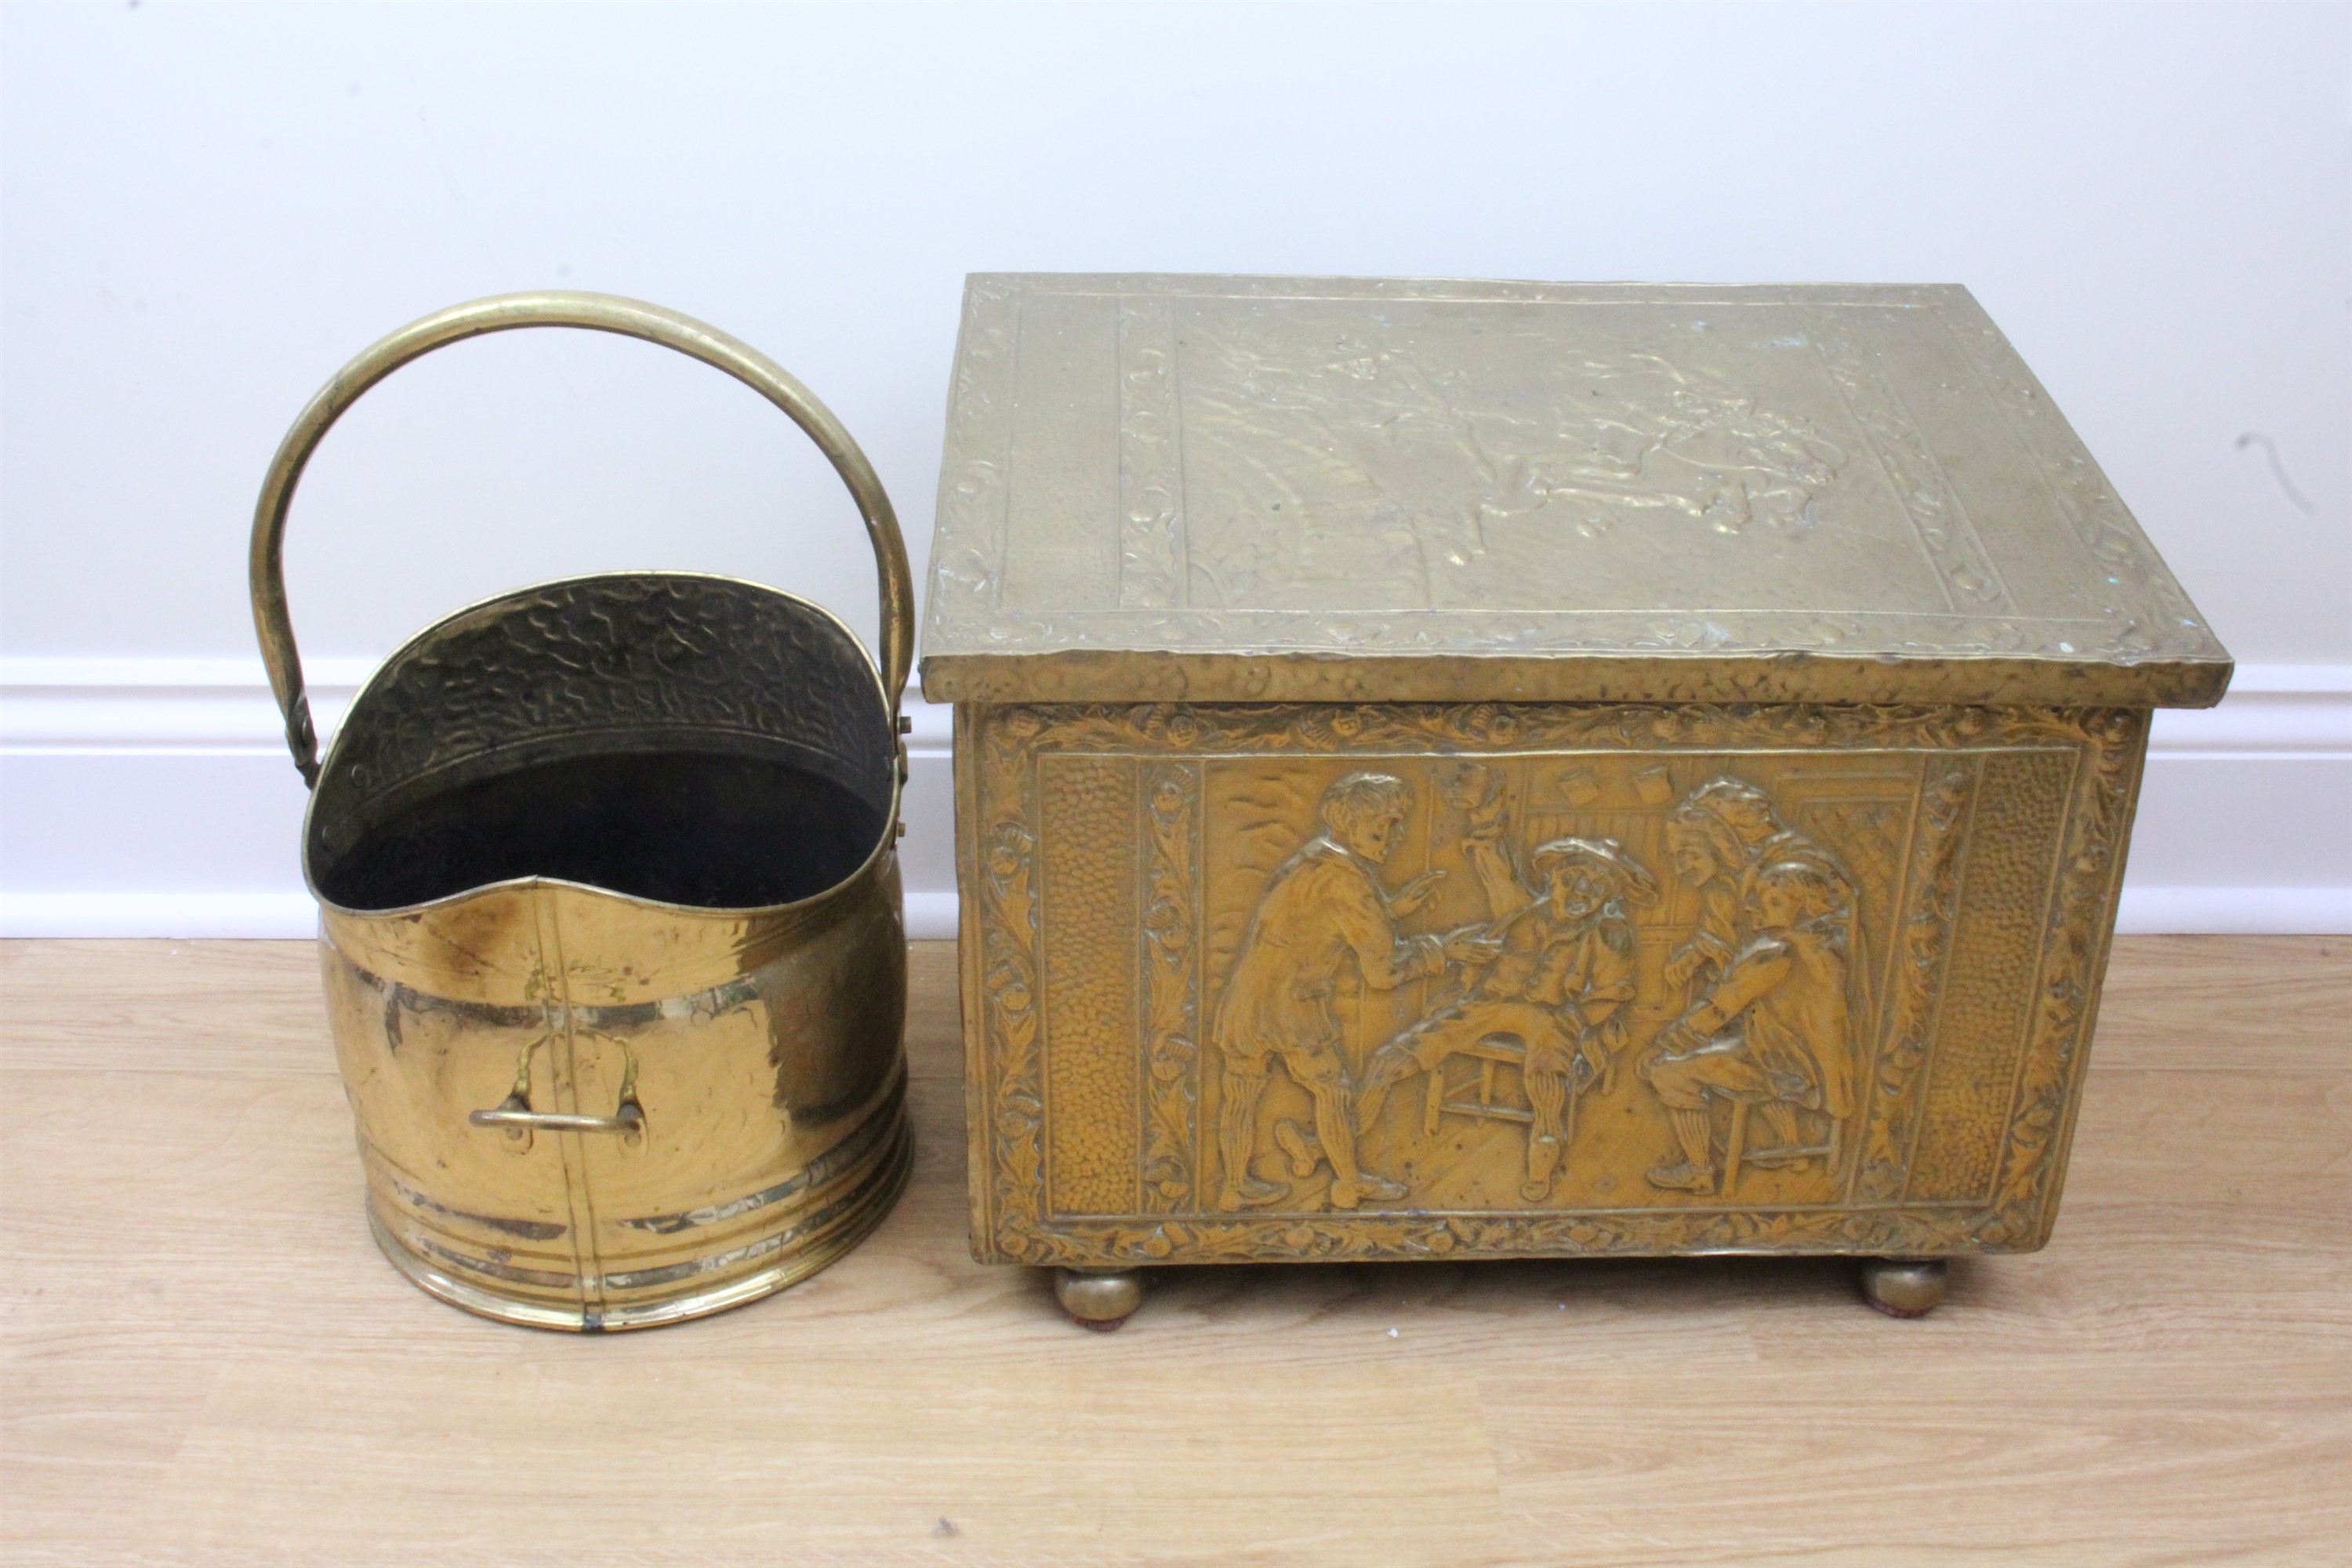 A brass bound log box, bearing scenes from Robert Burns' "Tam o' Shanter", together with a brass